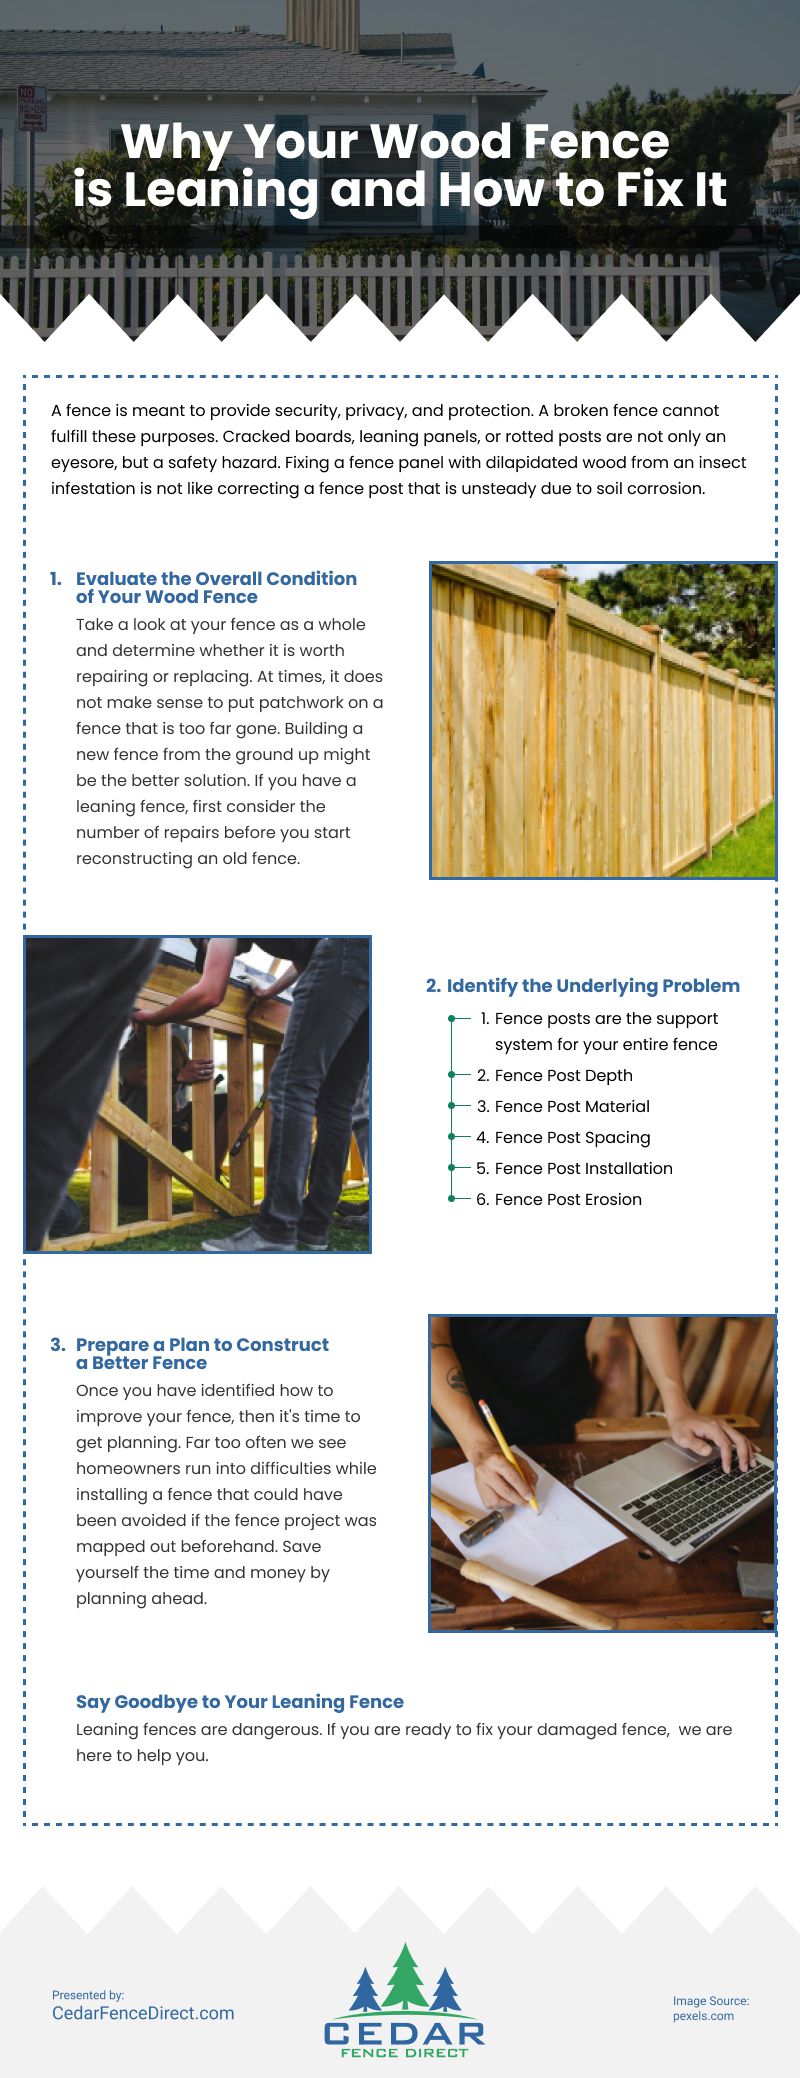 Why Your Wood Fence is Leaning and How to Fix It Infographic